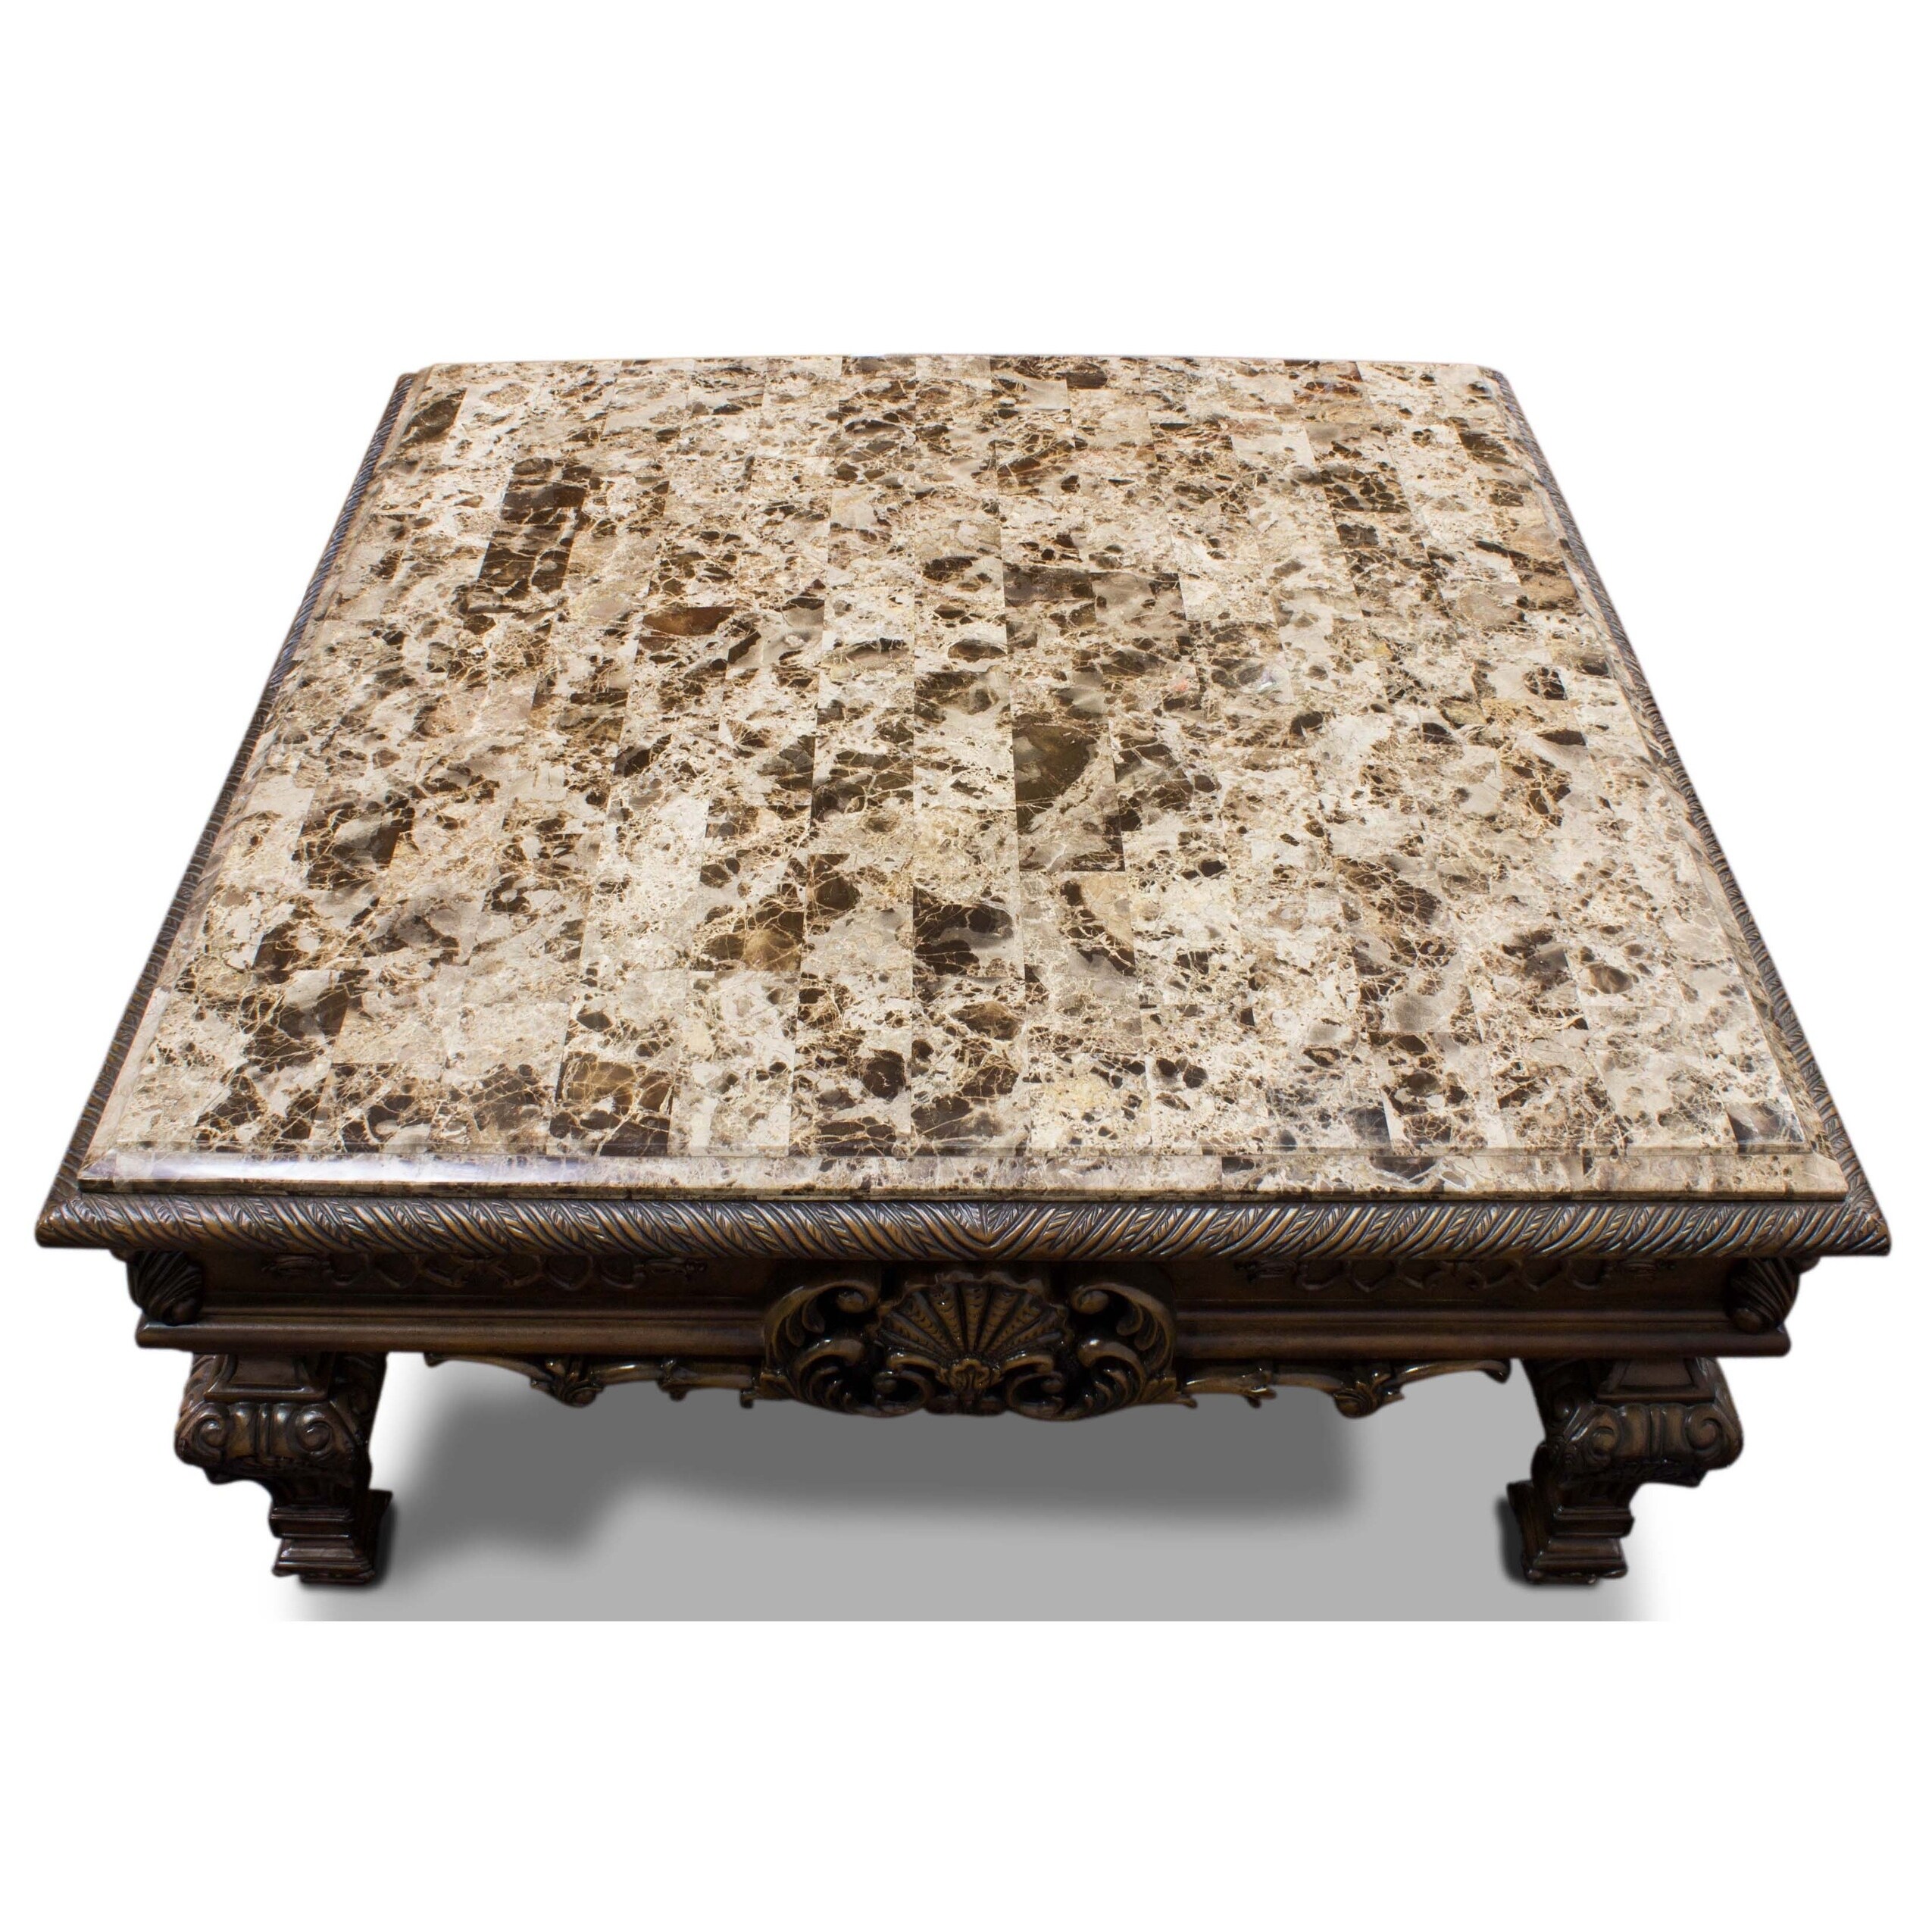 https://ak1.ostkcdn.com/images/products/30104898/Gracewood-Hollow-Gloria-Cherry-and-Marble-End-Table-fc061252-788d-47b1-a6ce-786080c83458.jpg